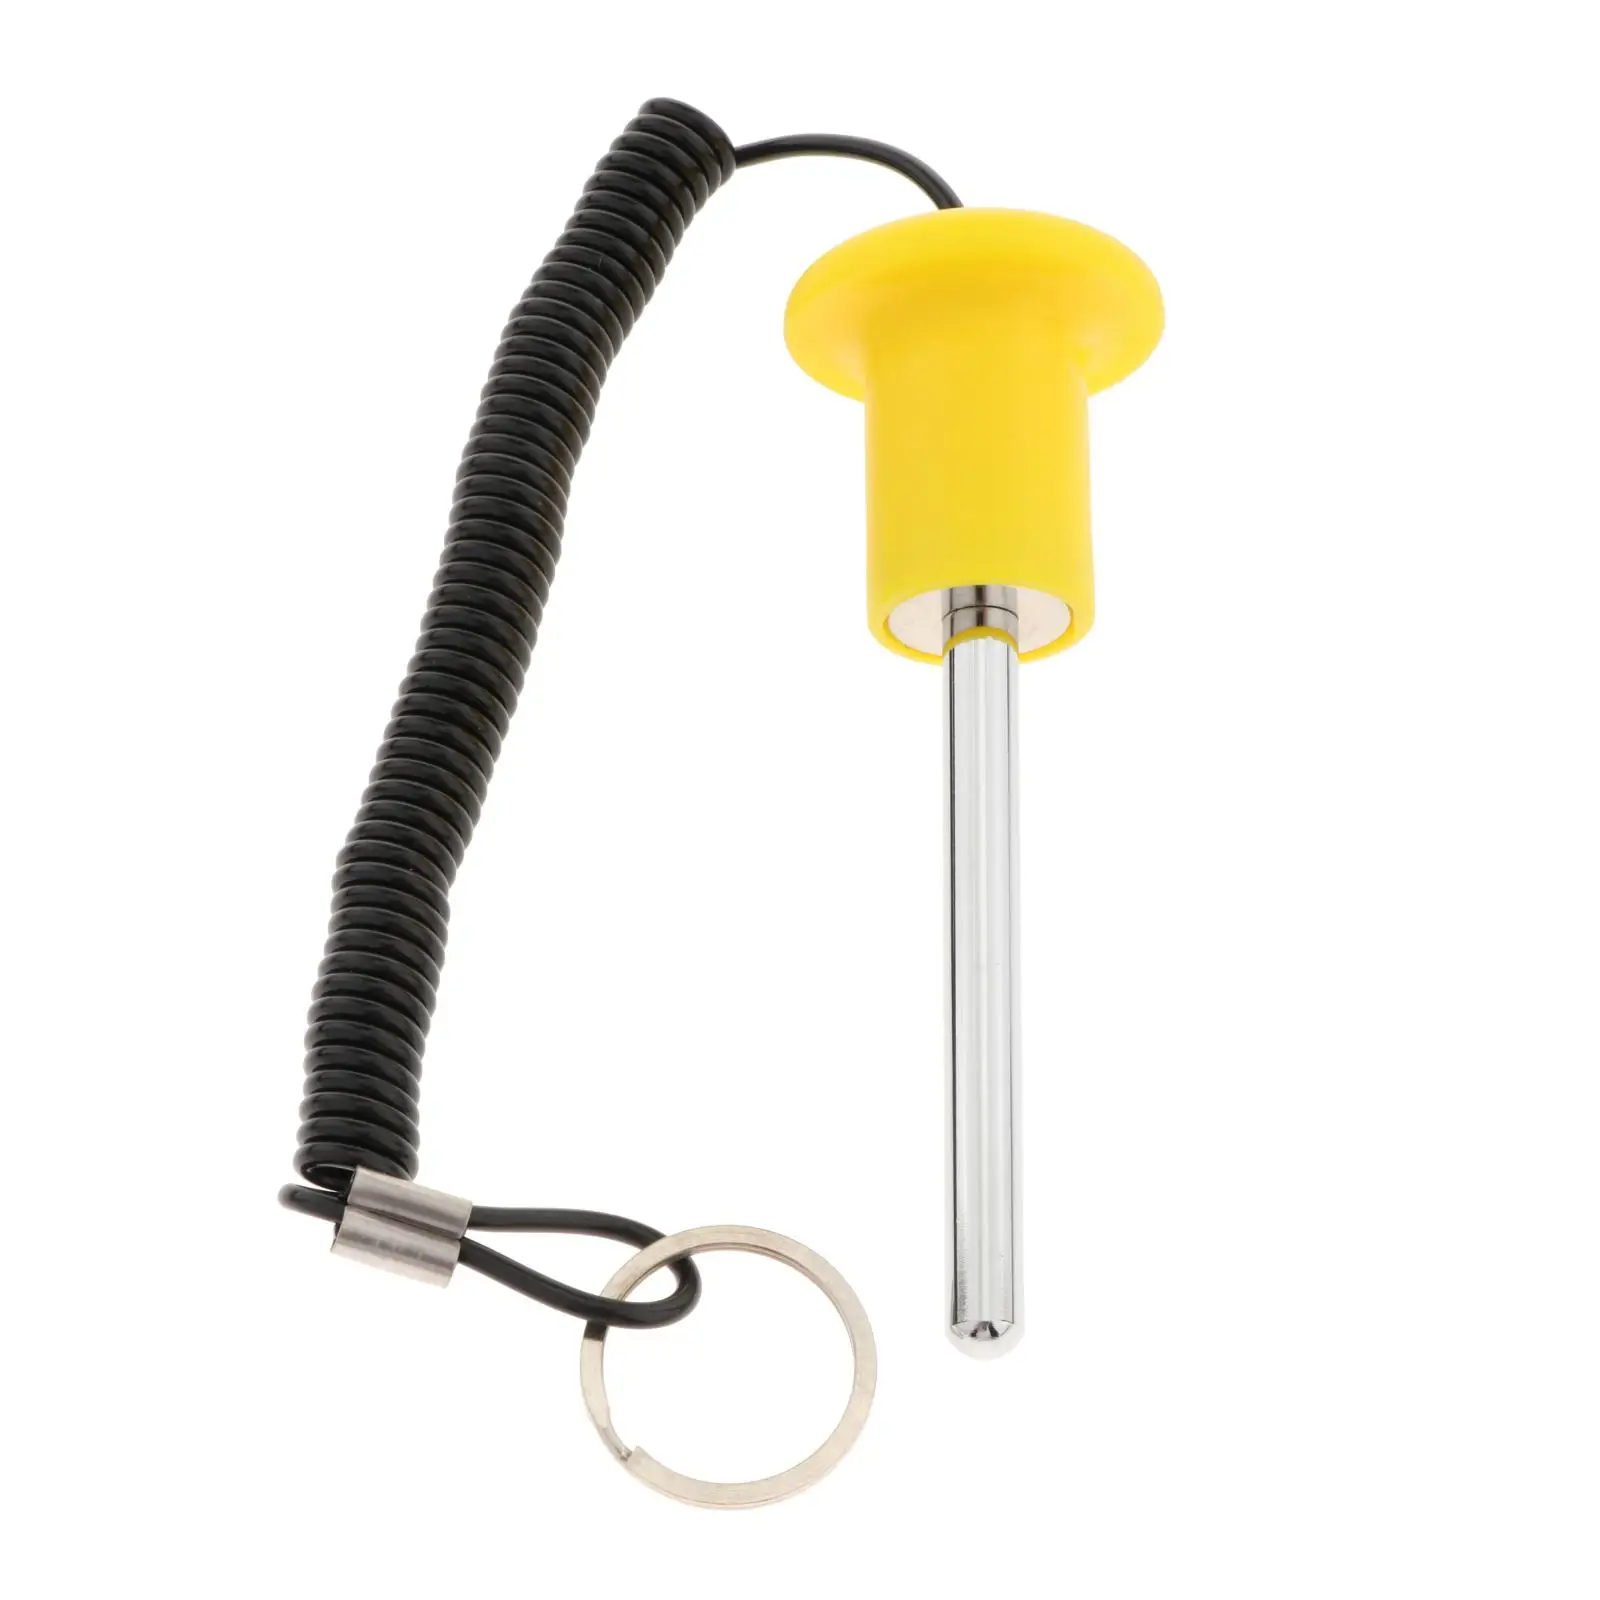 Pin, Tensile - Magnetic Universal Weight Stack Replacement Selector Key with reinforced Lanyard